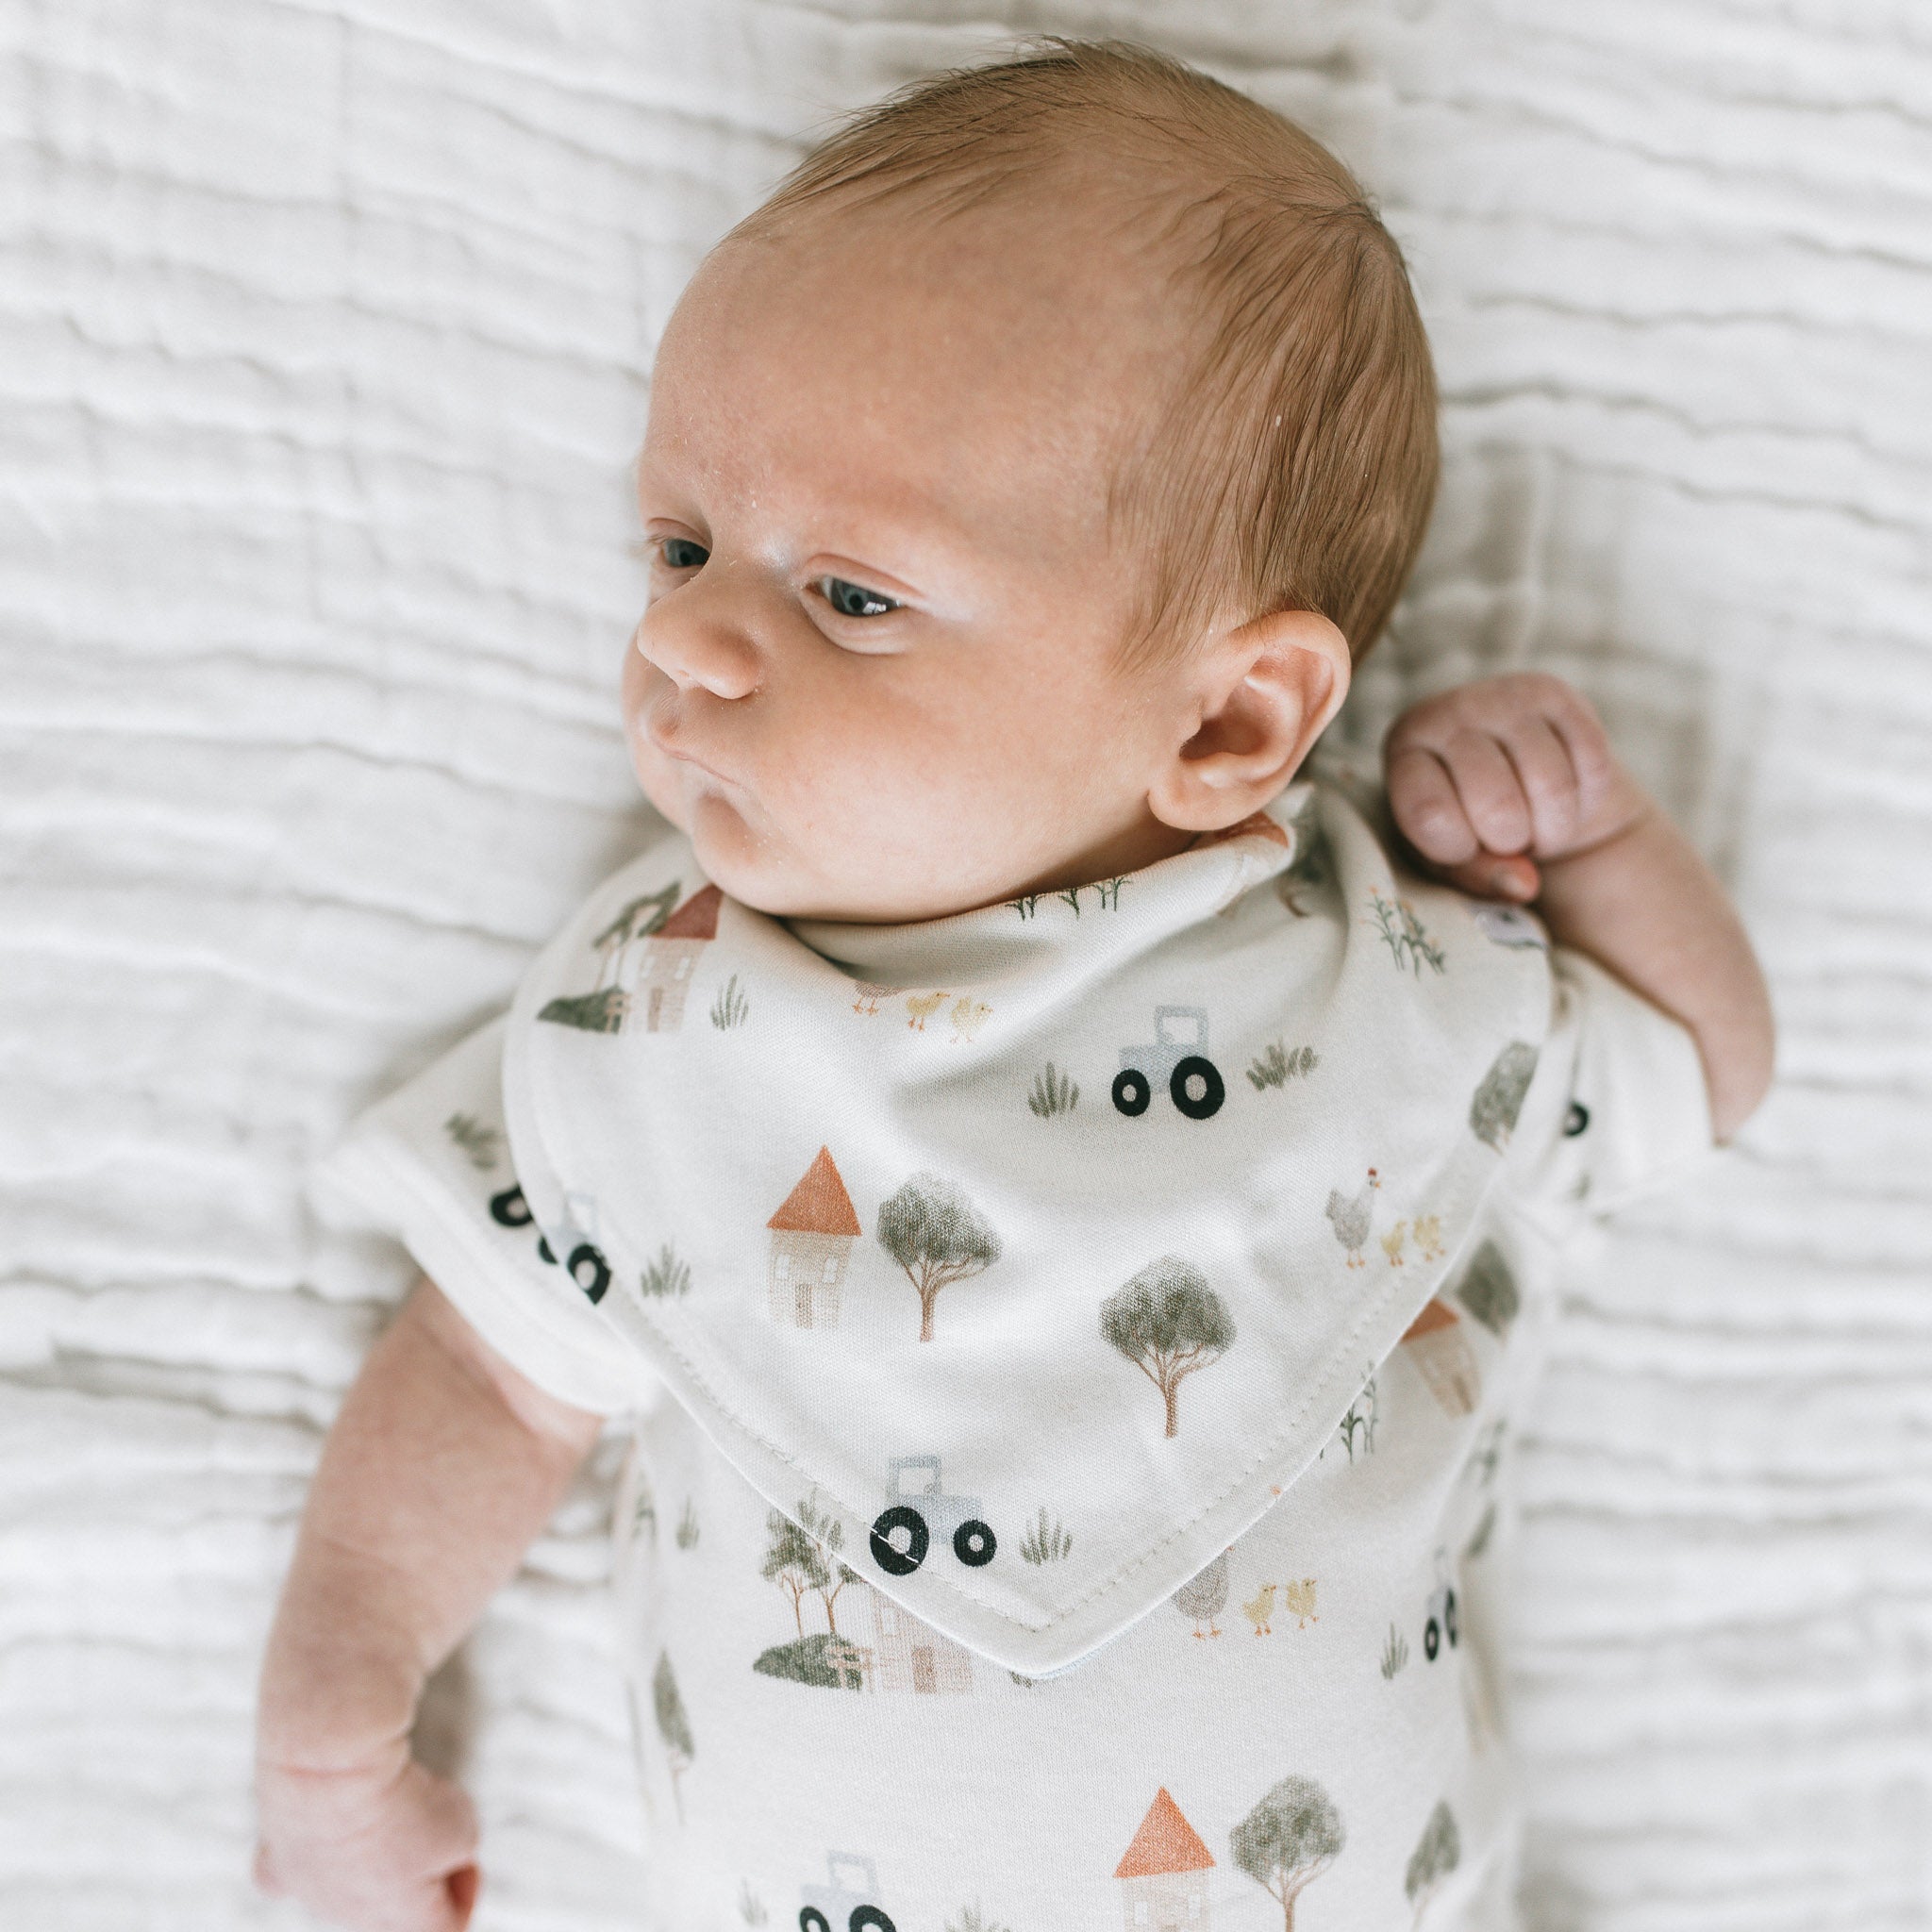 The Chilling Adventures Of Sabrina Academy Of Unse' Organic Short-Sleeved  Baby Bodysuit